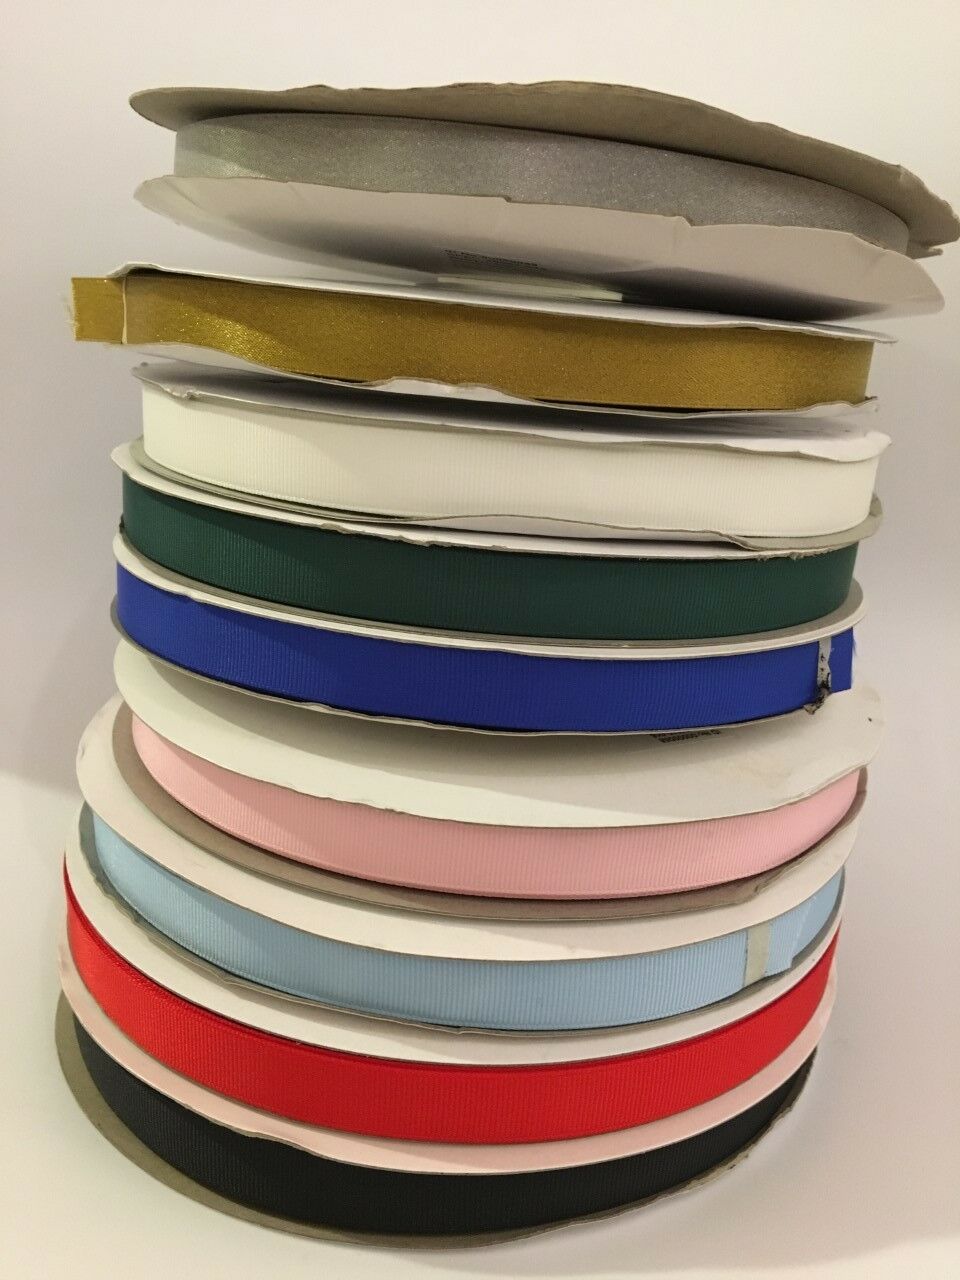 10 metres of 16mm Wide Grosgrain Ribbon - Various Colours - Hair Bow Crafts